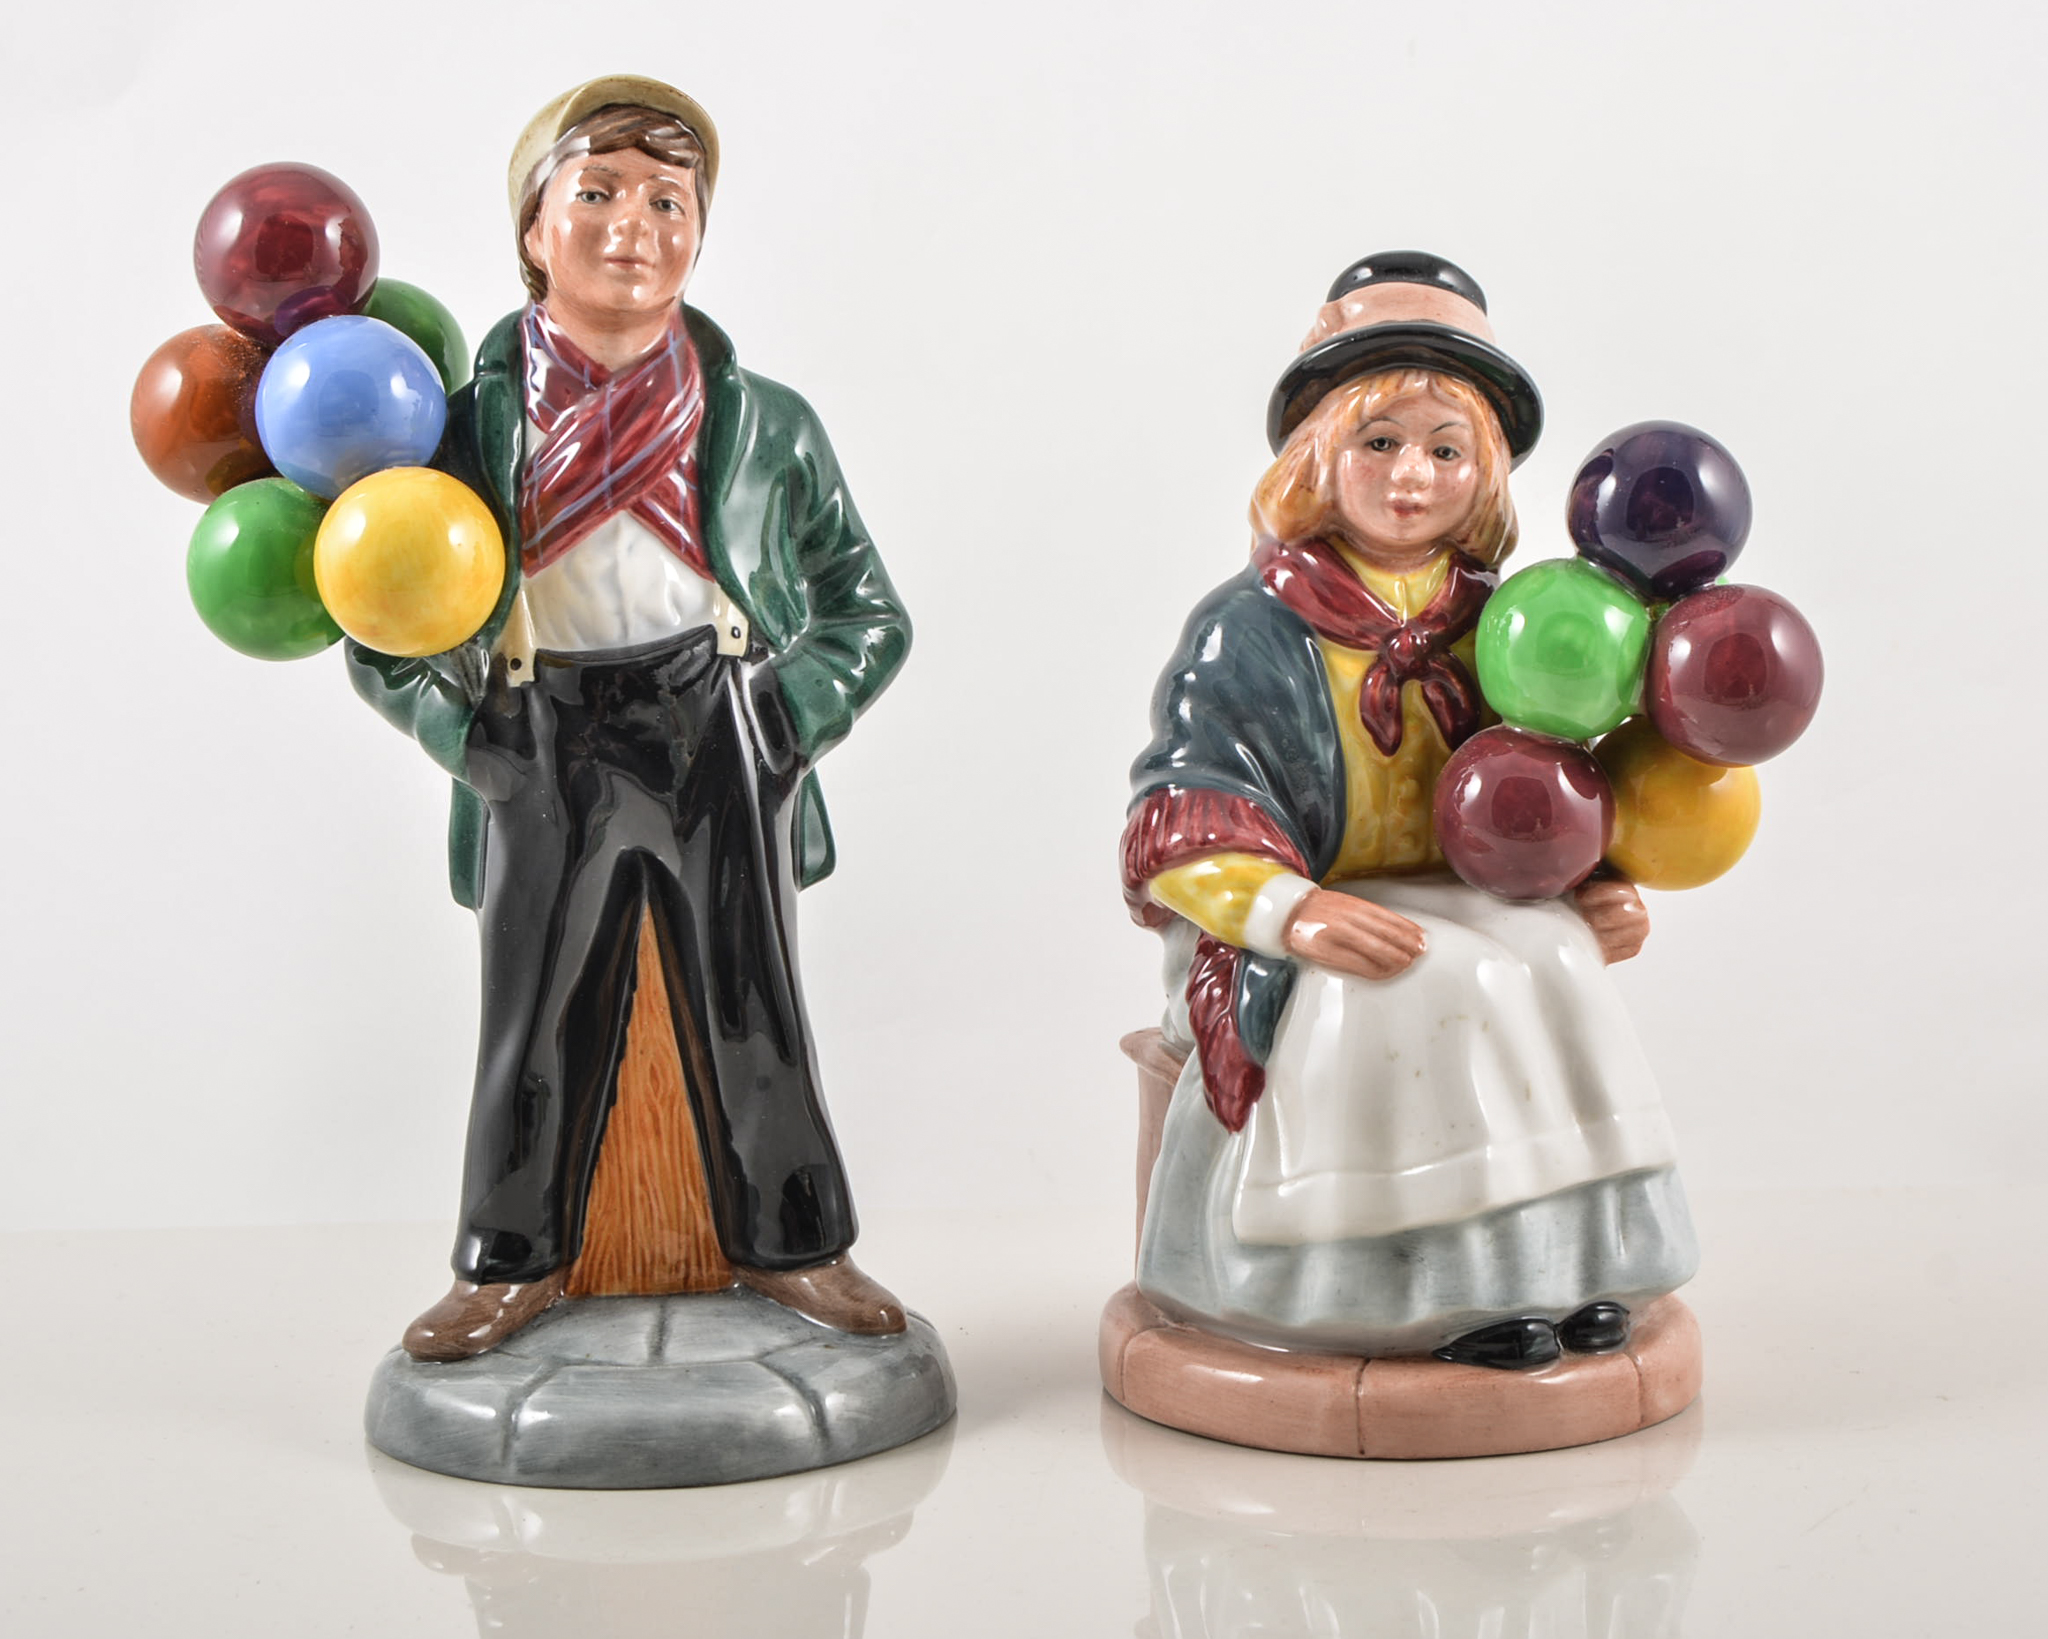 Two Royal Doulton Figurines, "Balloon Boy" number HN2934, "Balloon Girl" number HN2818.